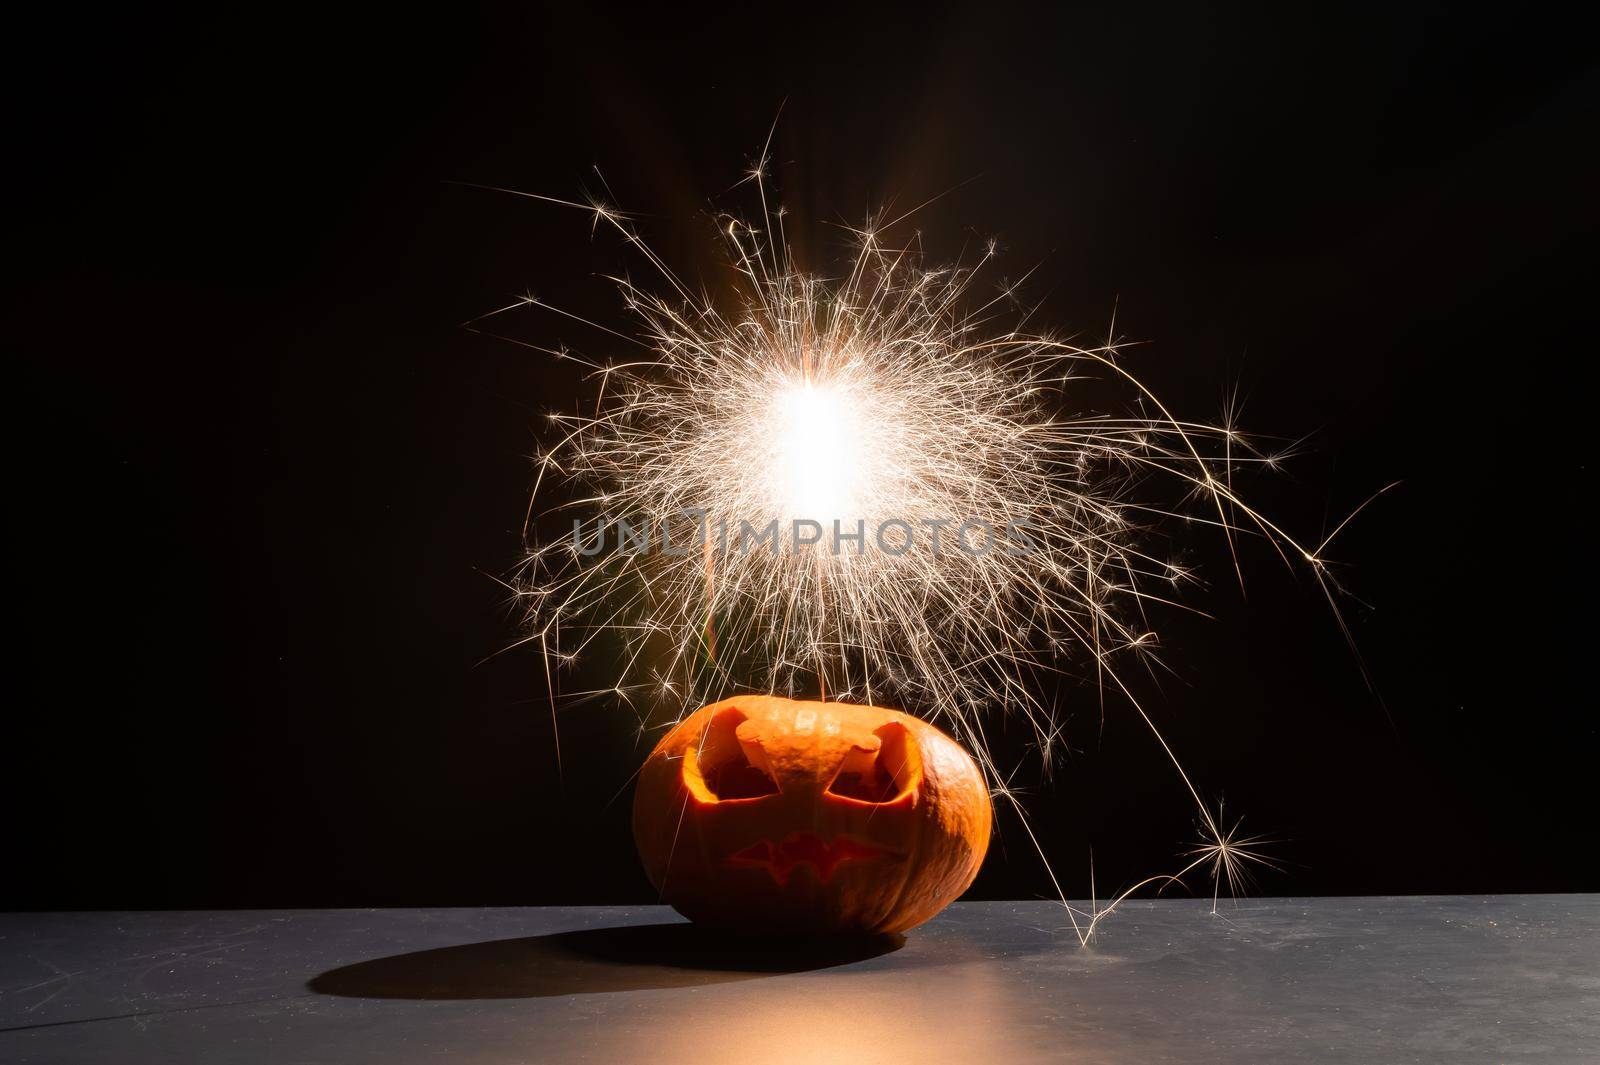 Halloween pumpkin with scary carved grimace and sparklers. jack-o-lantern.